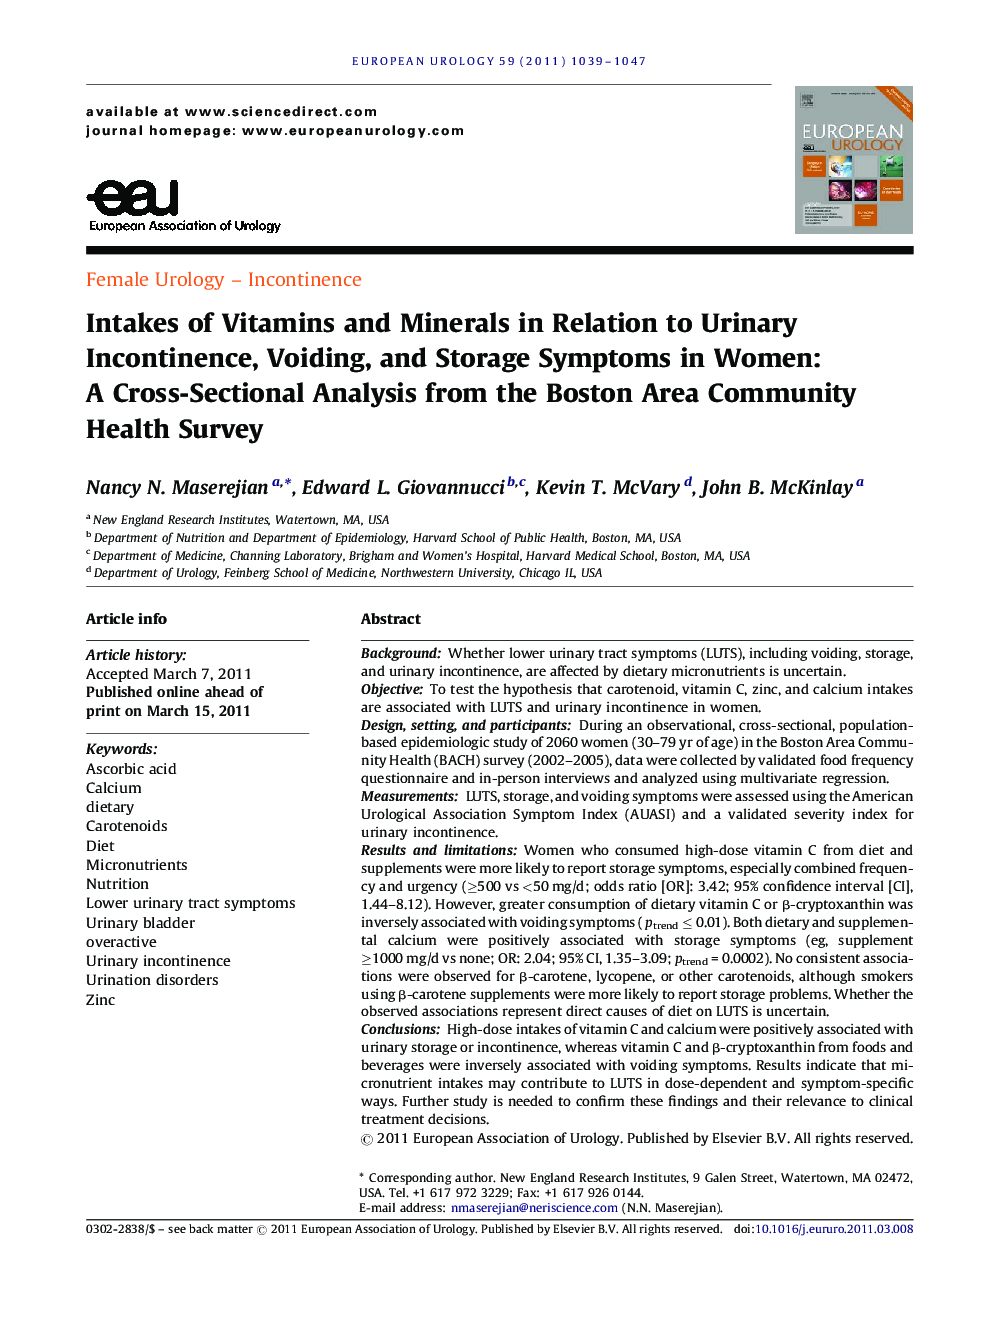 Intakes of Vitamins and Minerals in Relation to Urinary Incontinence, Voiding, and Storage Symptoms in Women: A Cross-Sectional Analysis from the Boston Area Community Health Survey